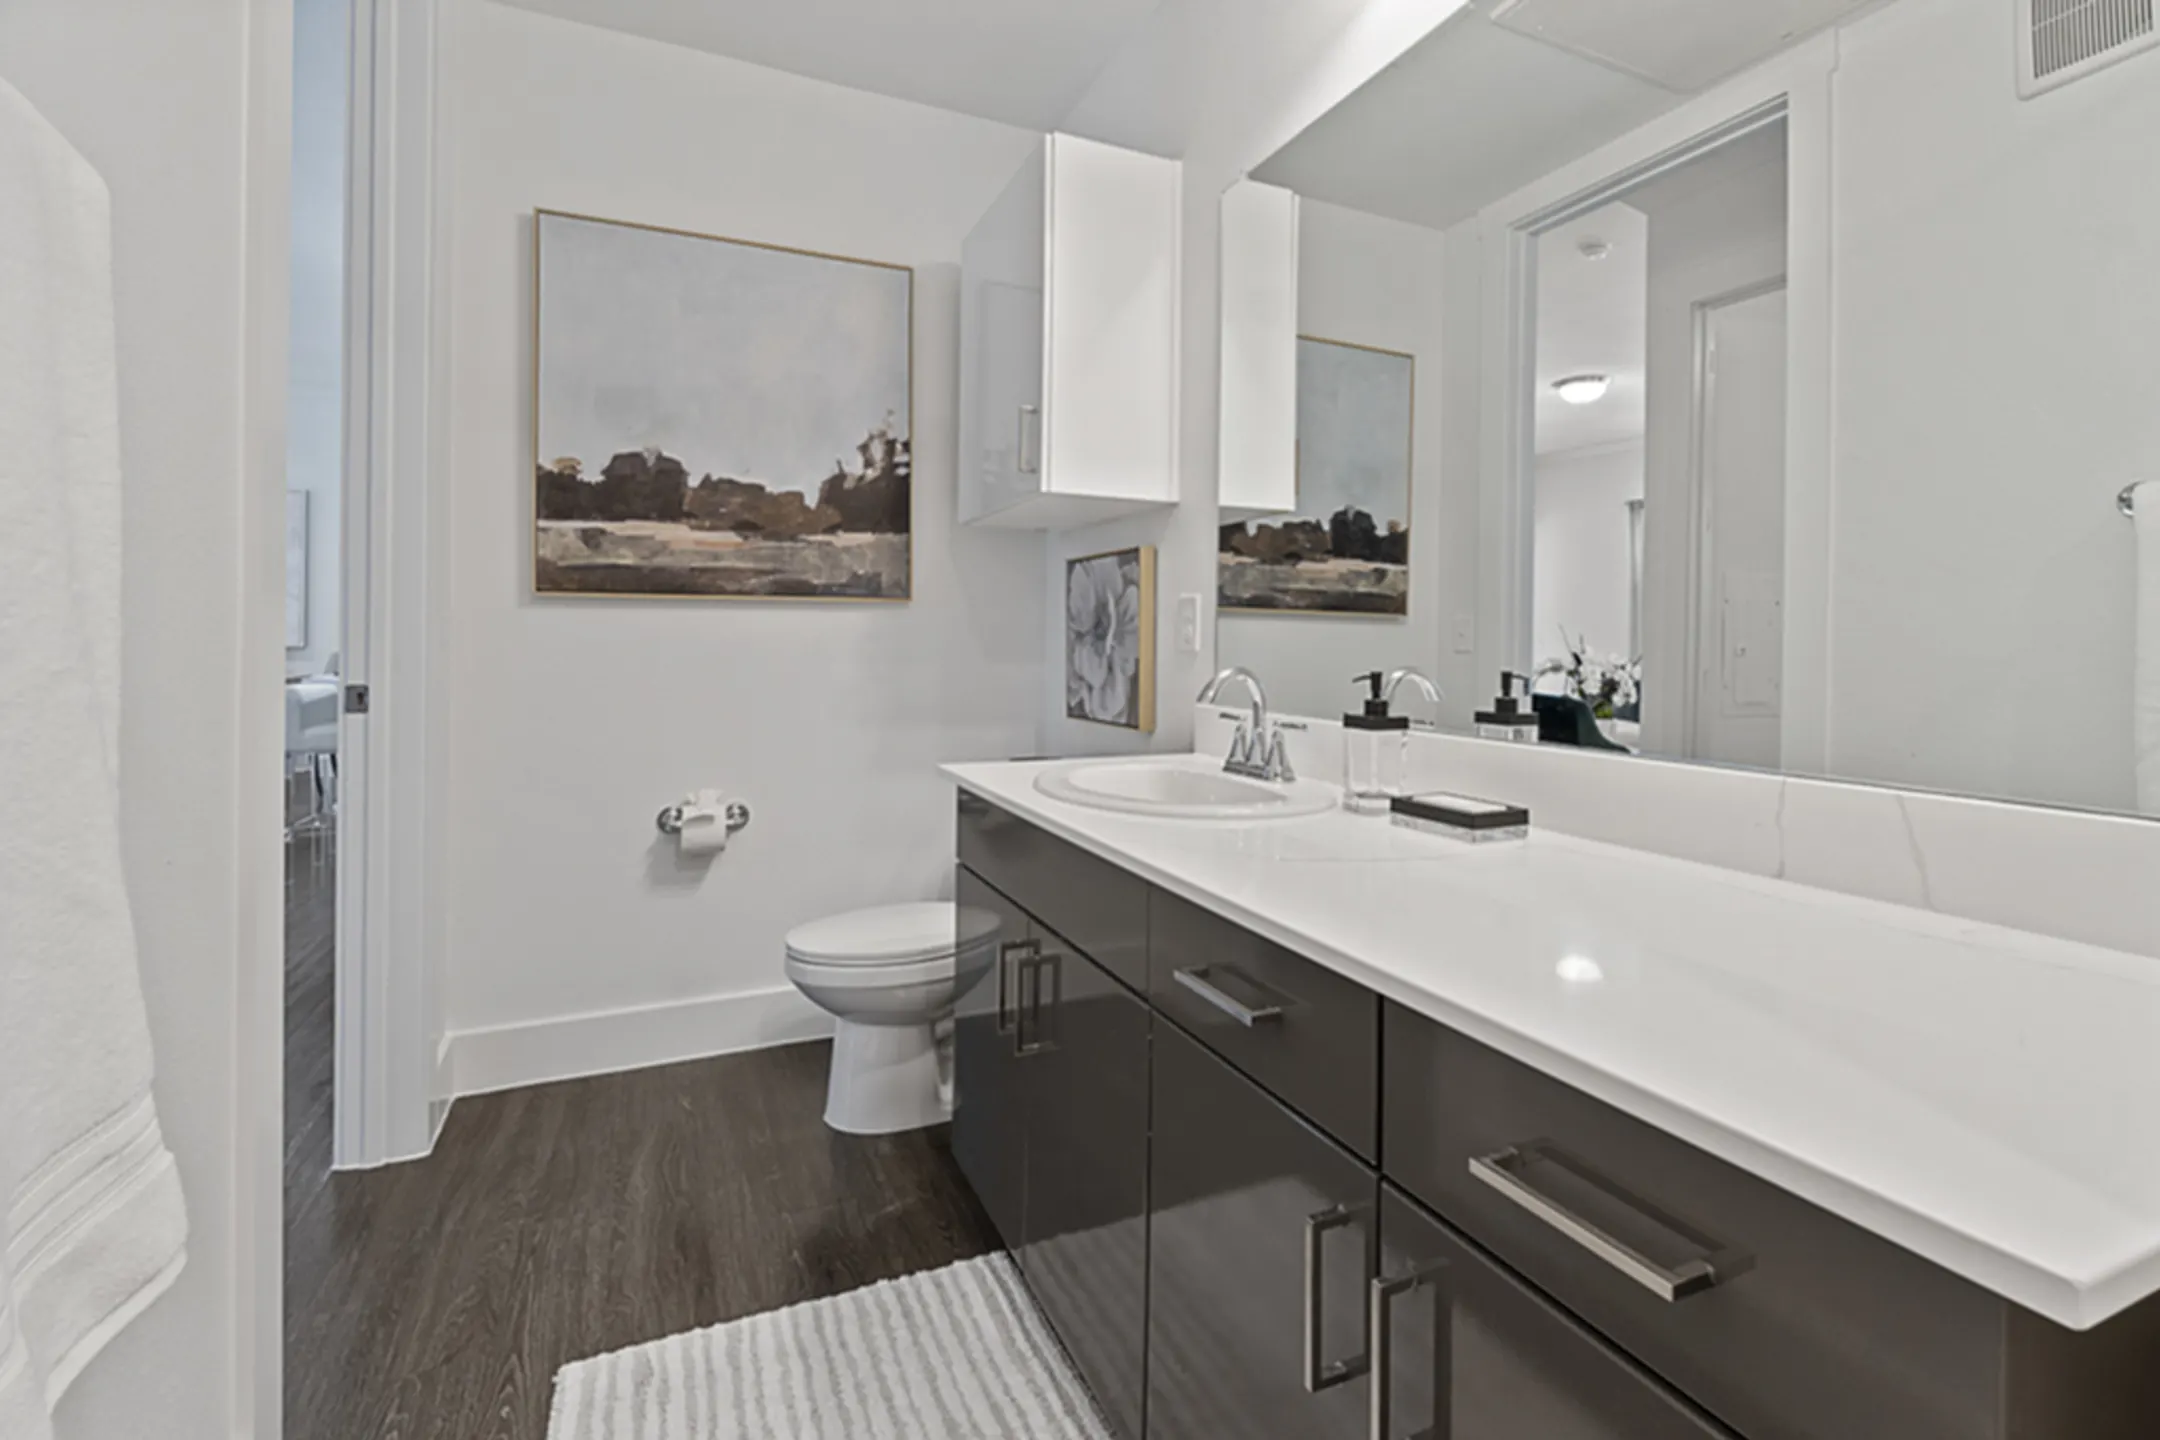 Bathroom - The Luxe at Mercer Crossing - Farmers Branch, TX